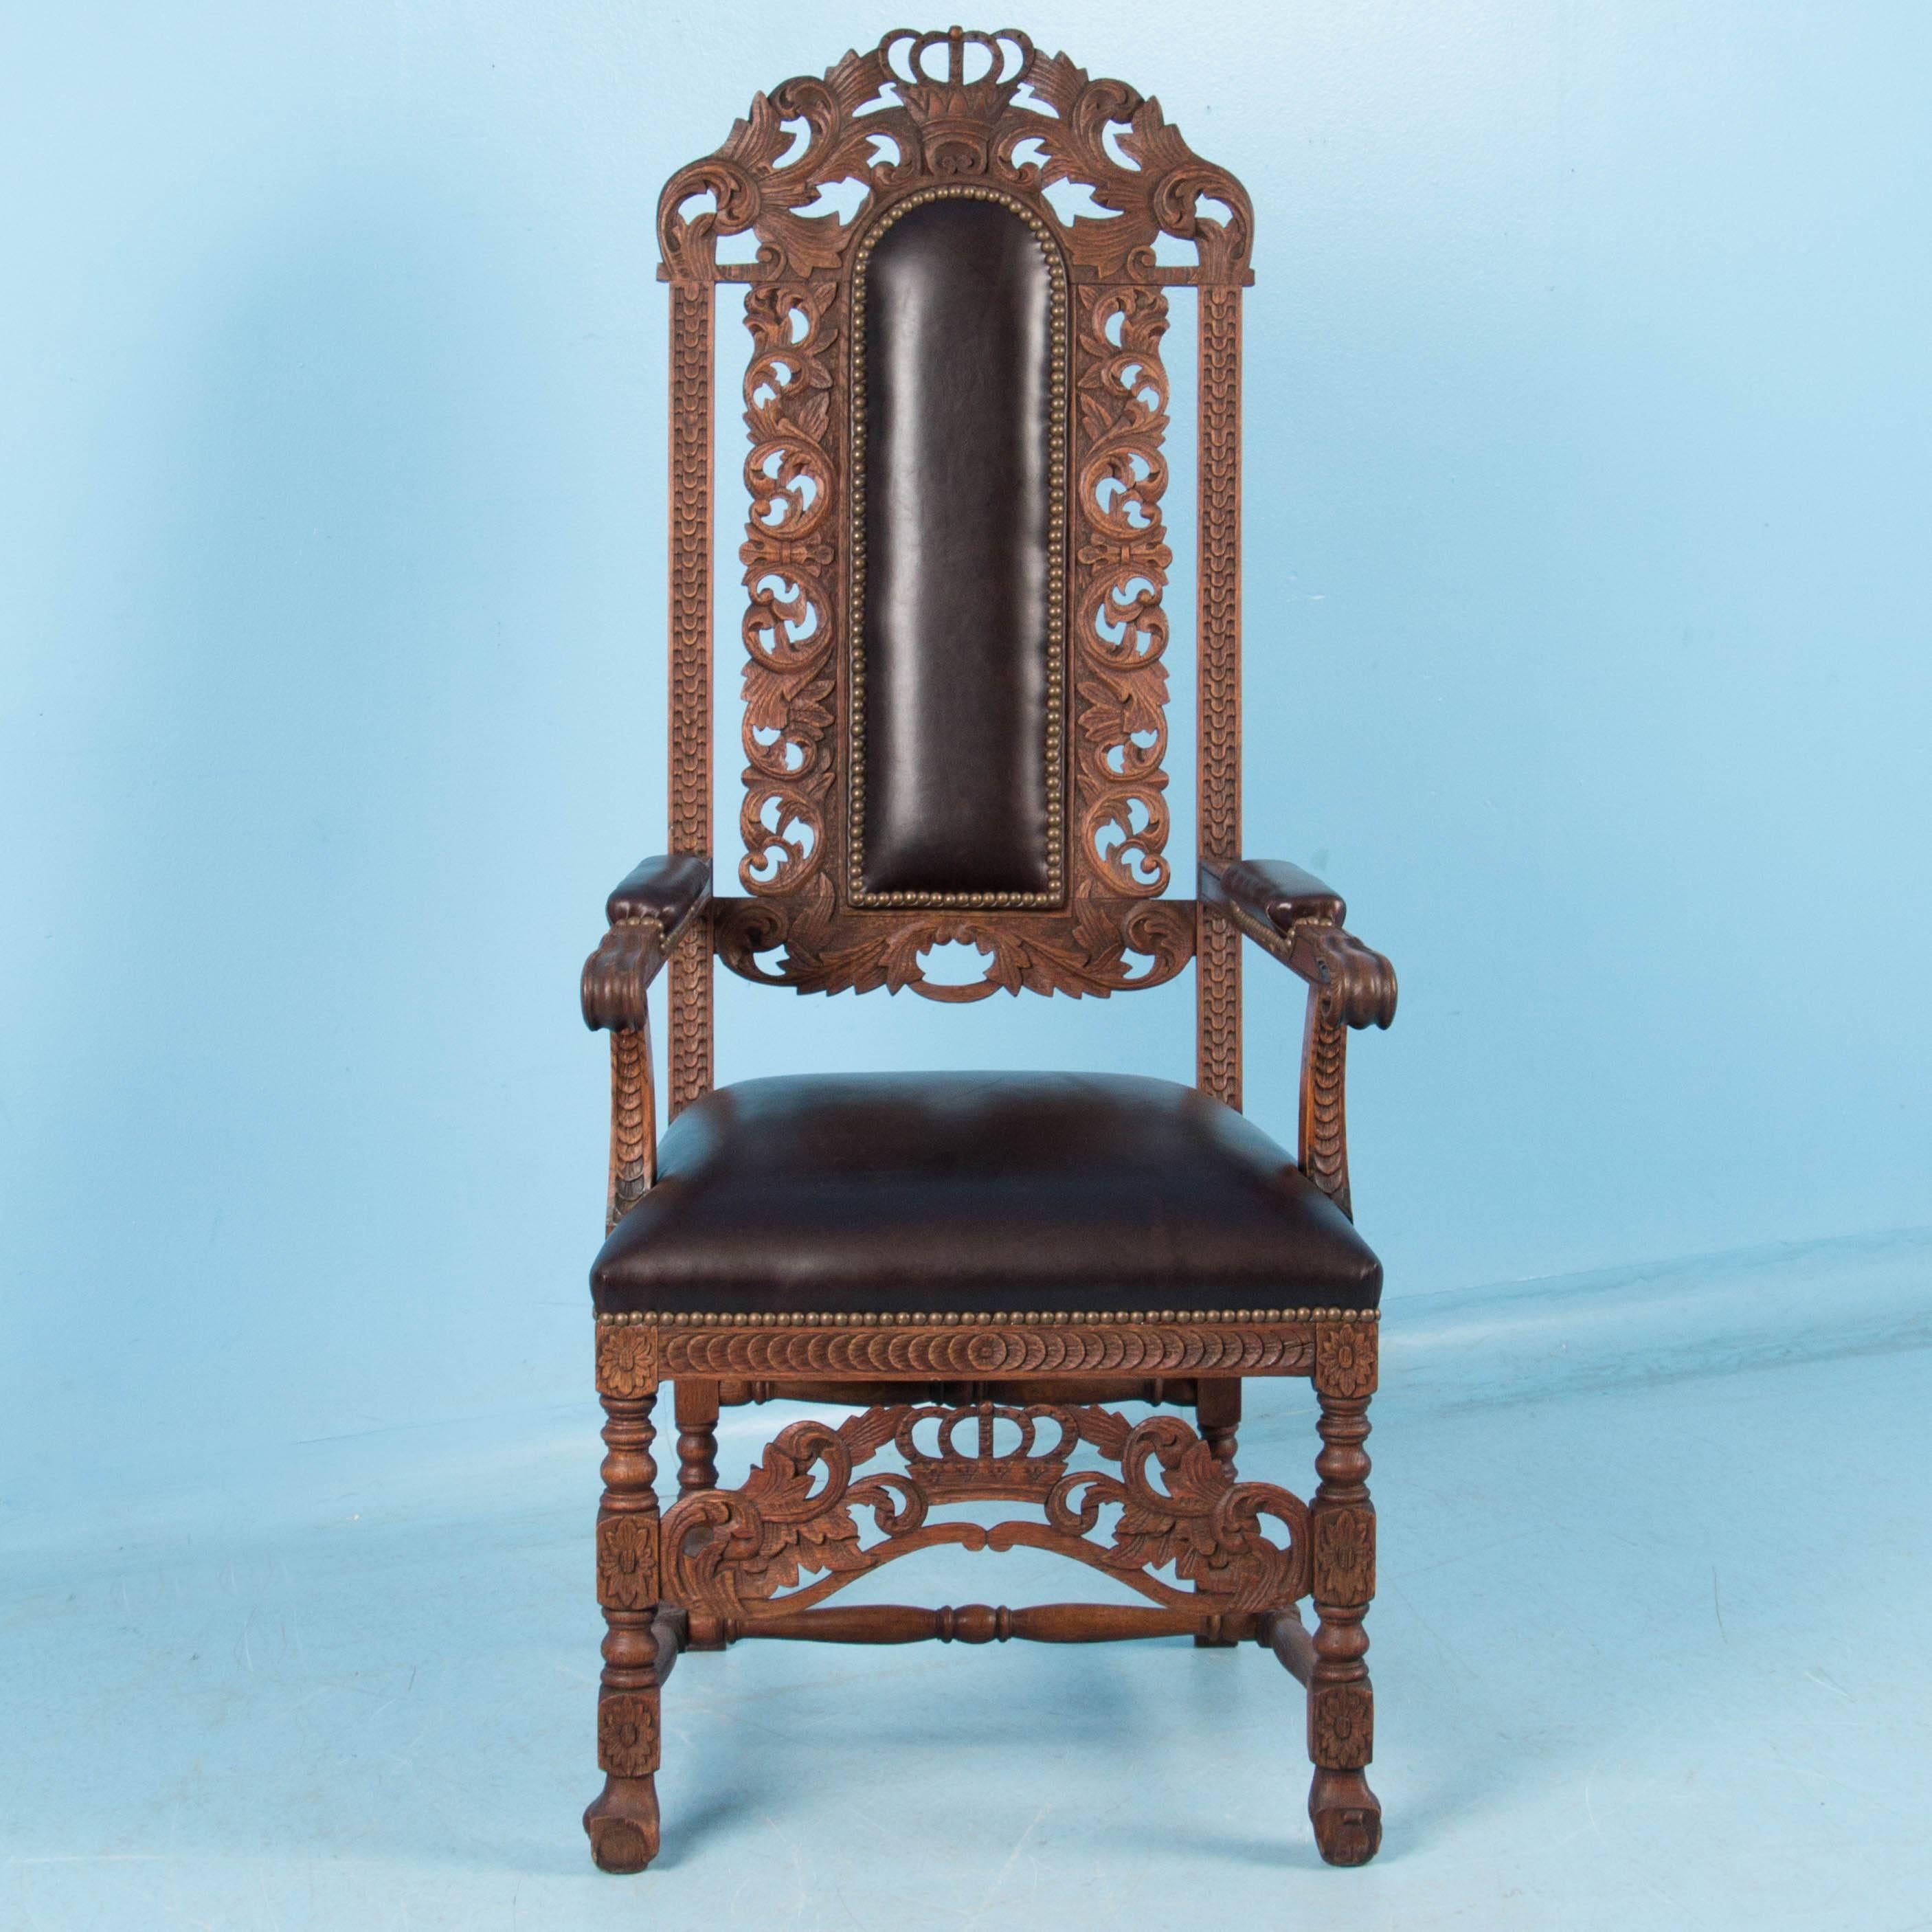 This handsome chair is ready to grace your home or office with both style and function. The hand-carved oak arms, feet and high back are traditional features of the Danish baroque period with a crown motif on the top center. The upholstered seat,